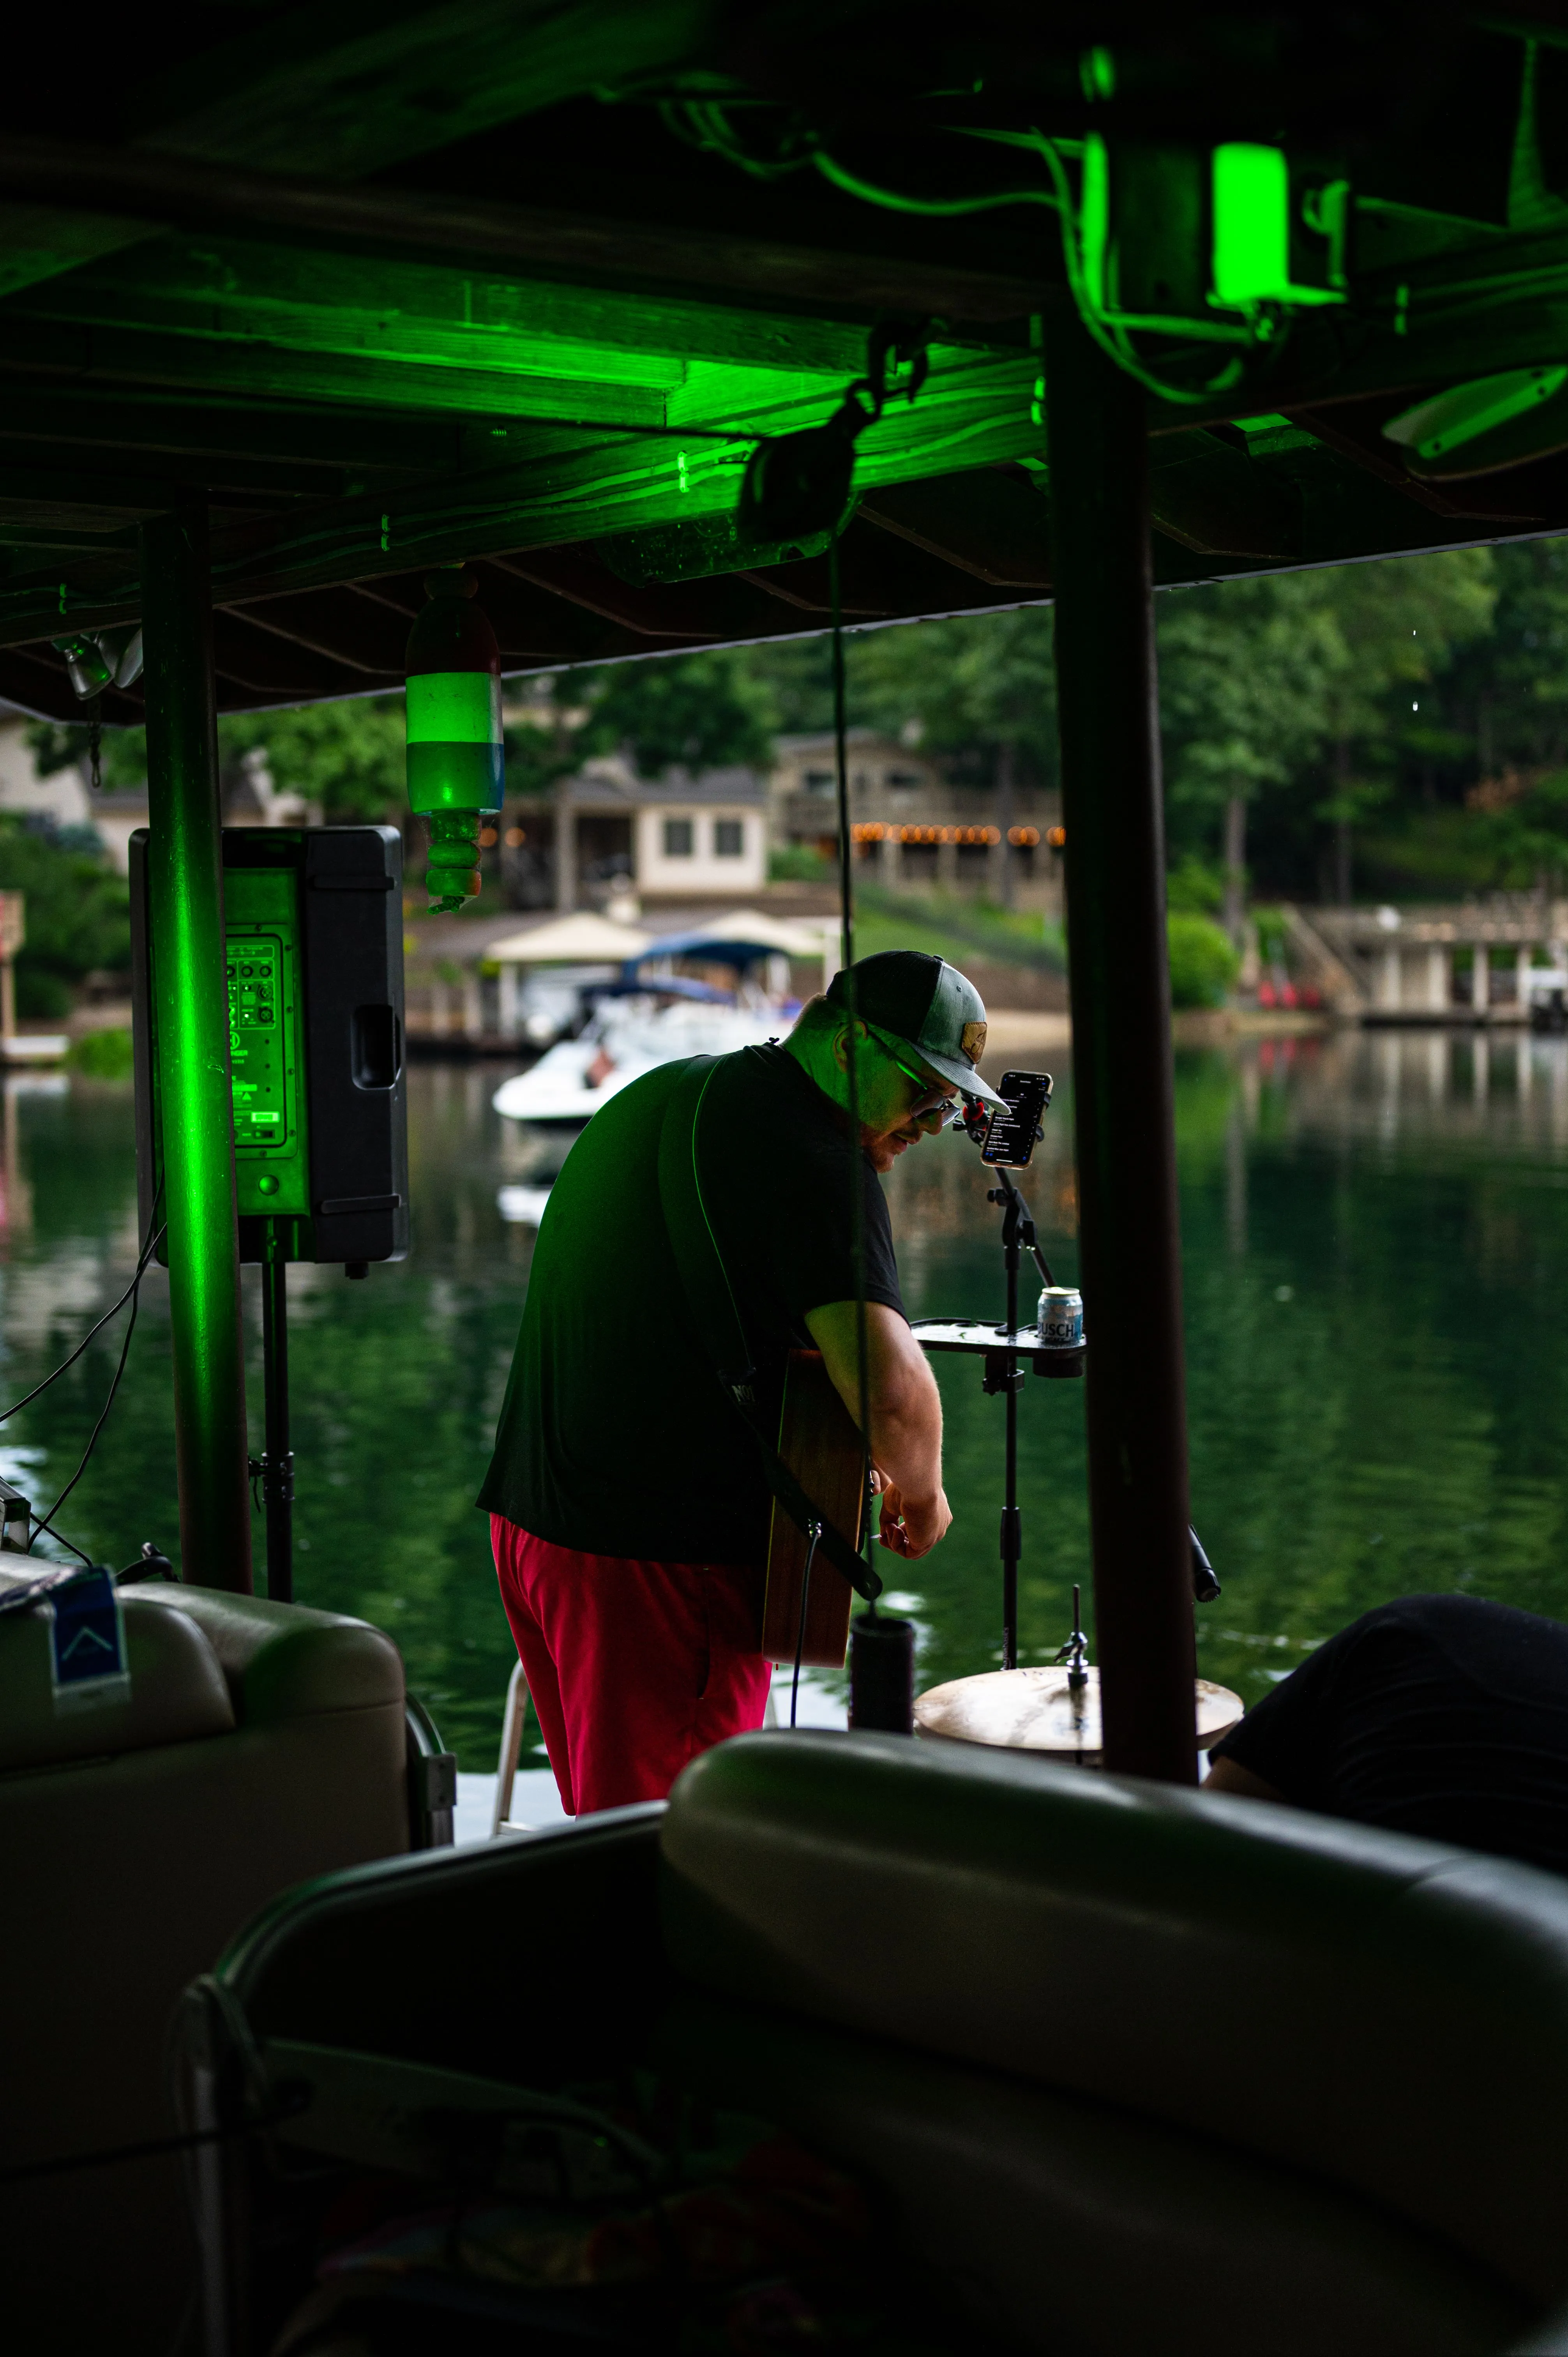 A boat captain steering from the helm inside the cabin with lake and dock visible through the windows.